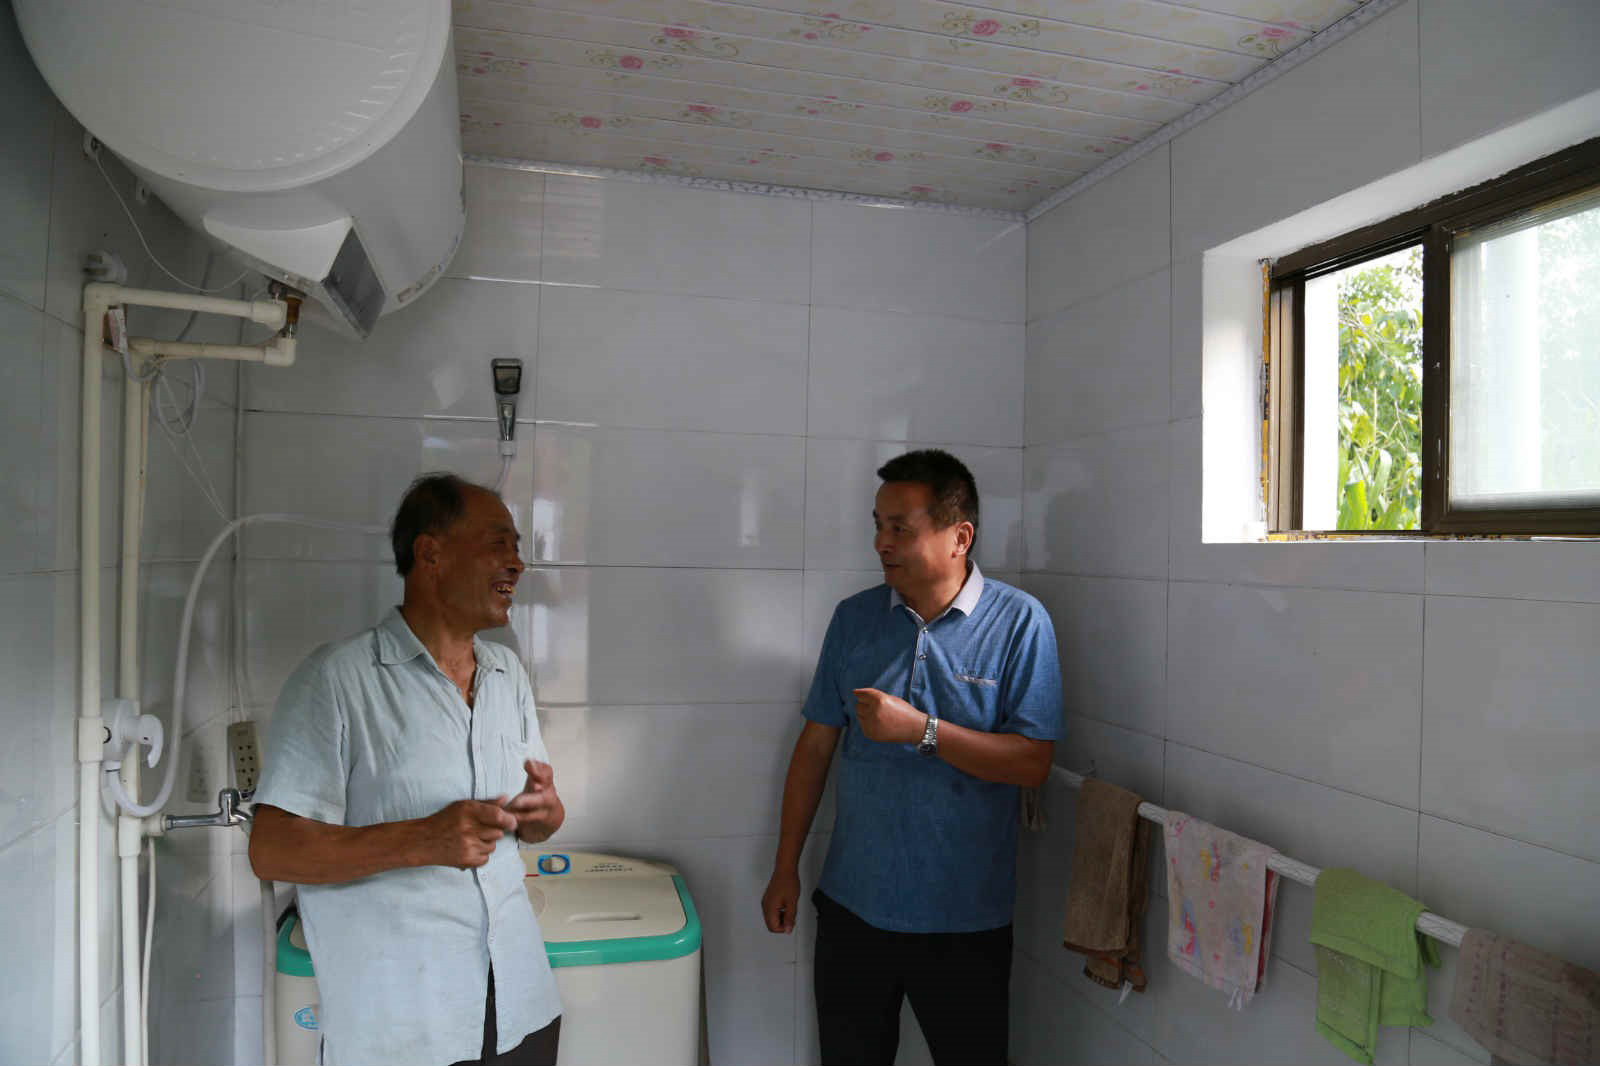 China’s ‘toilet revolution’ brings new look to rural areas